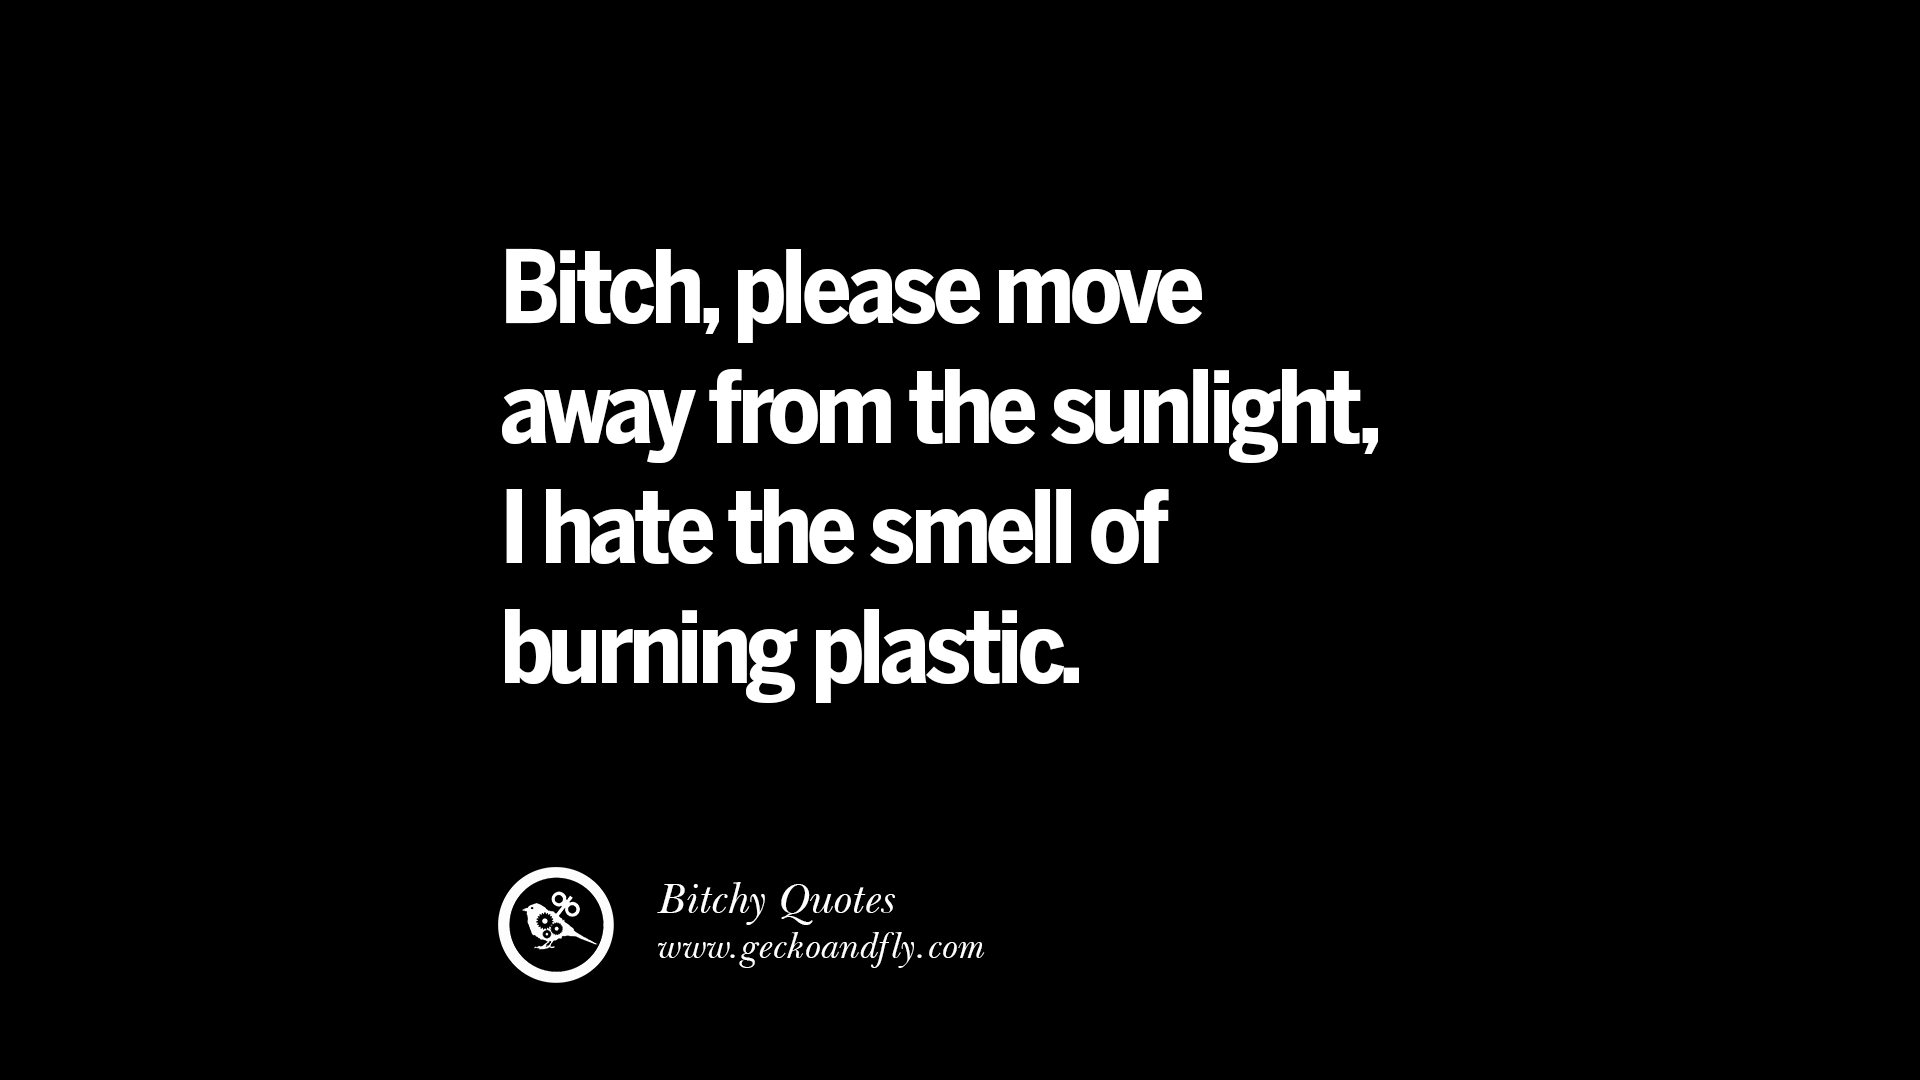 Bitch please move away from the sunlight I hate the smell of burning plastic